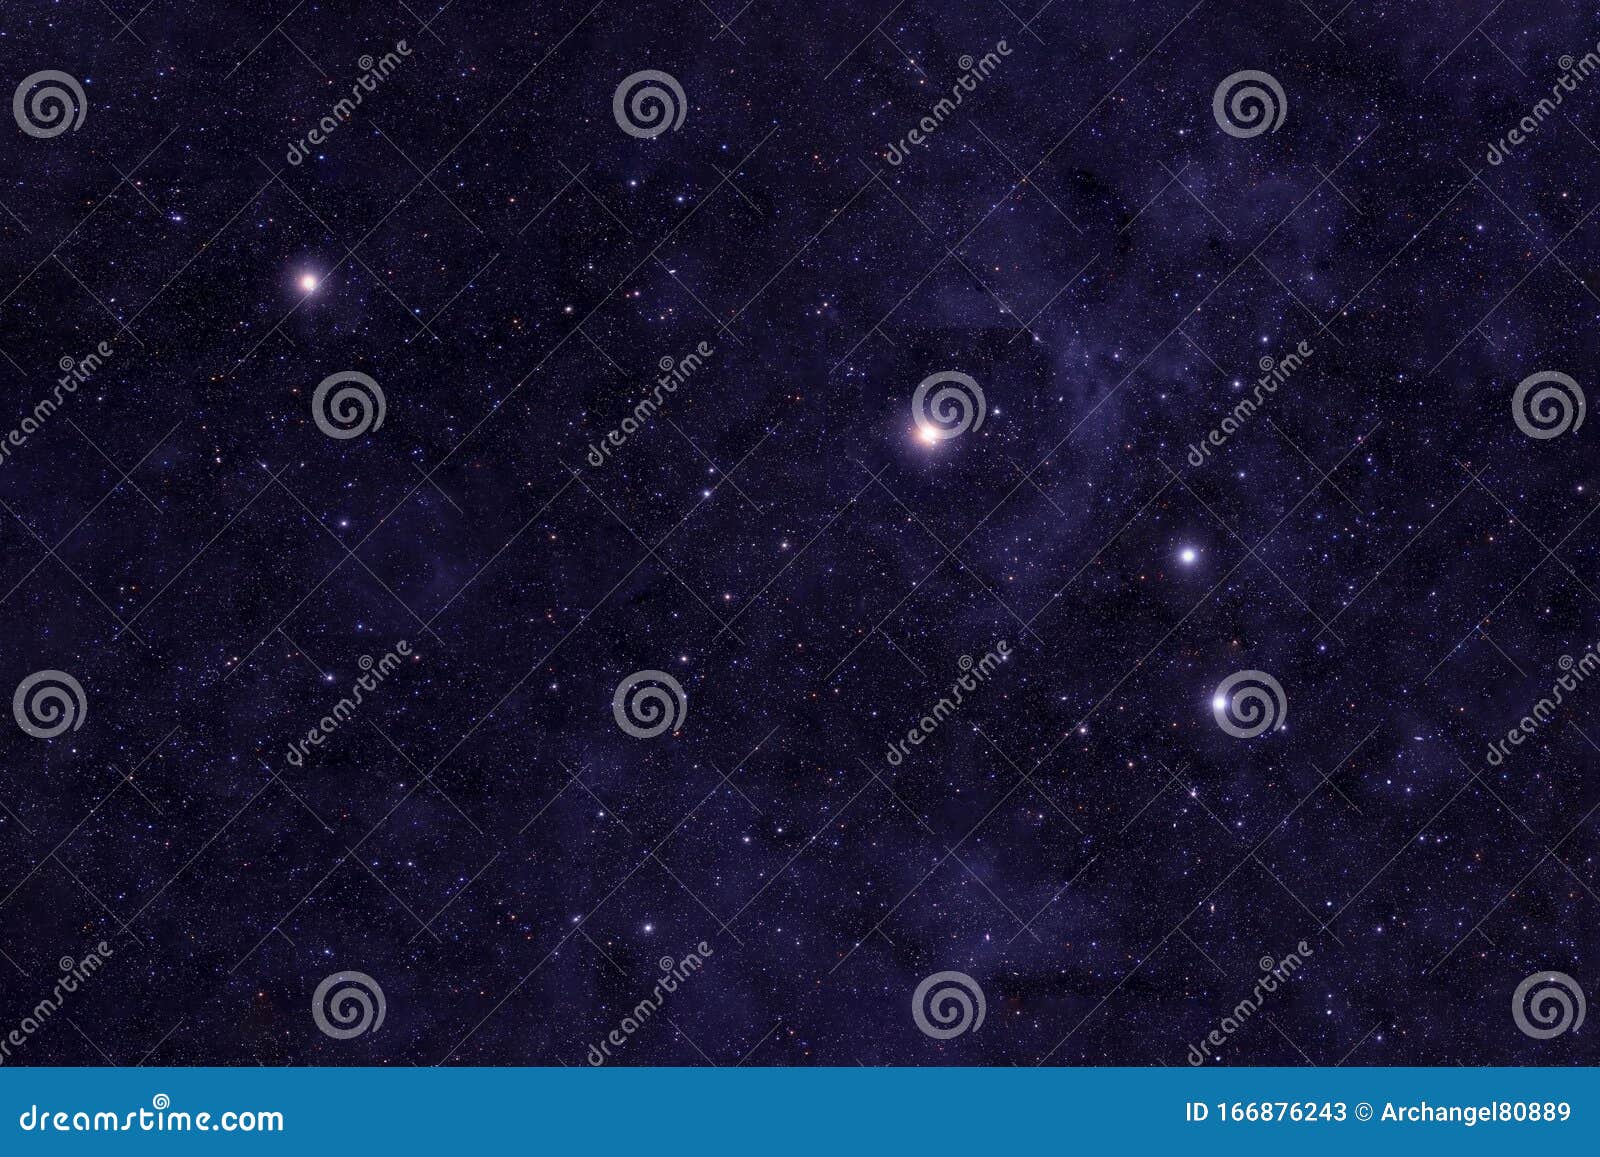 aries constellation. against the background of the night sky. s of this image were furnished by nasa